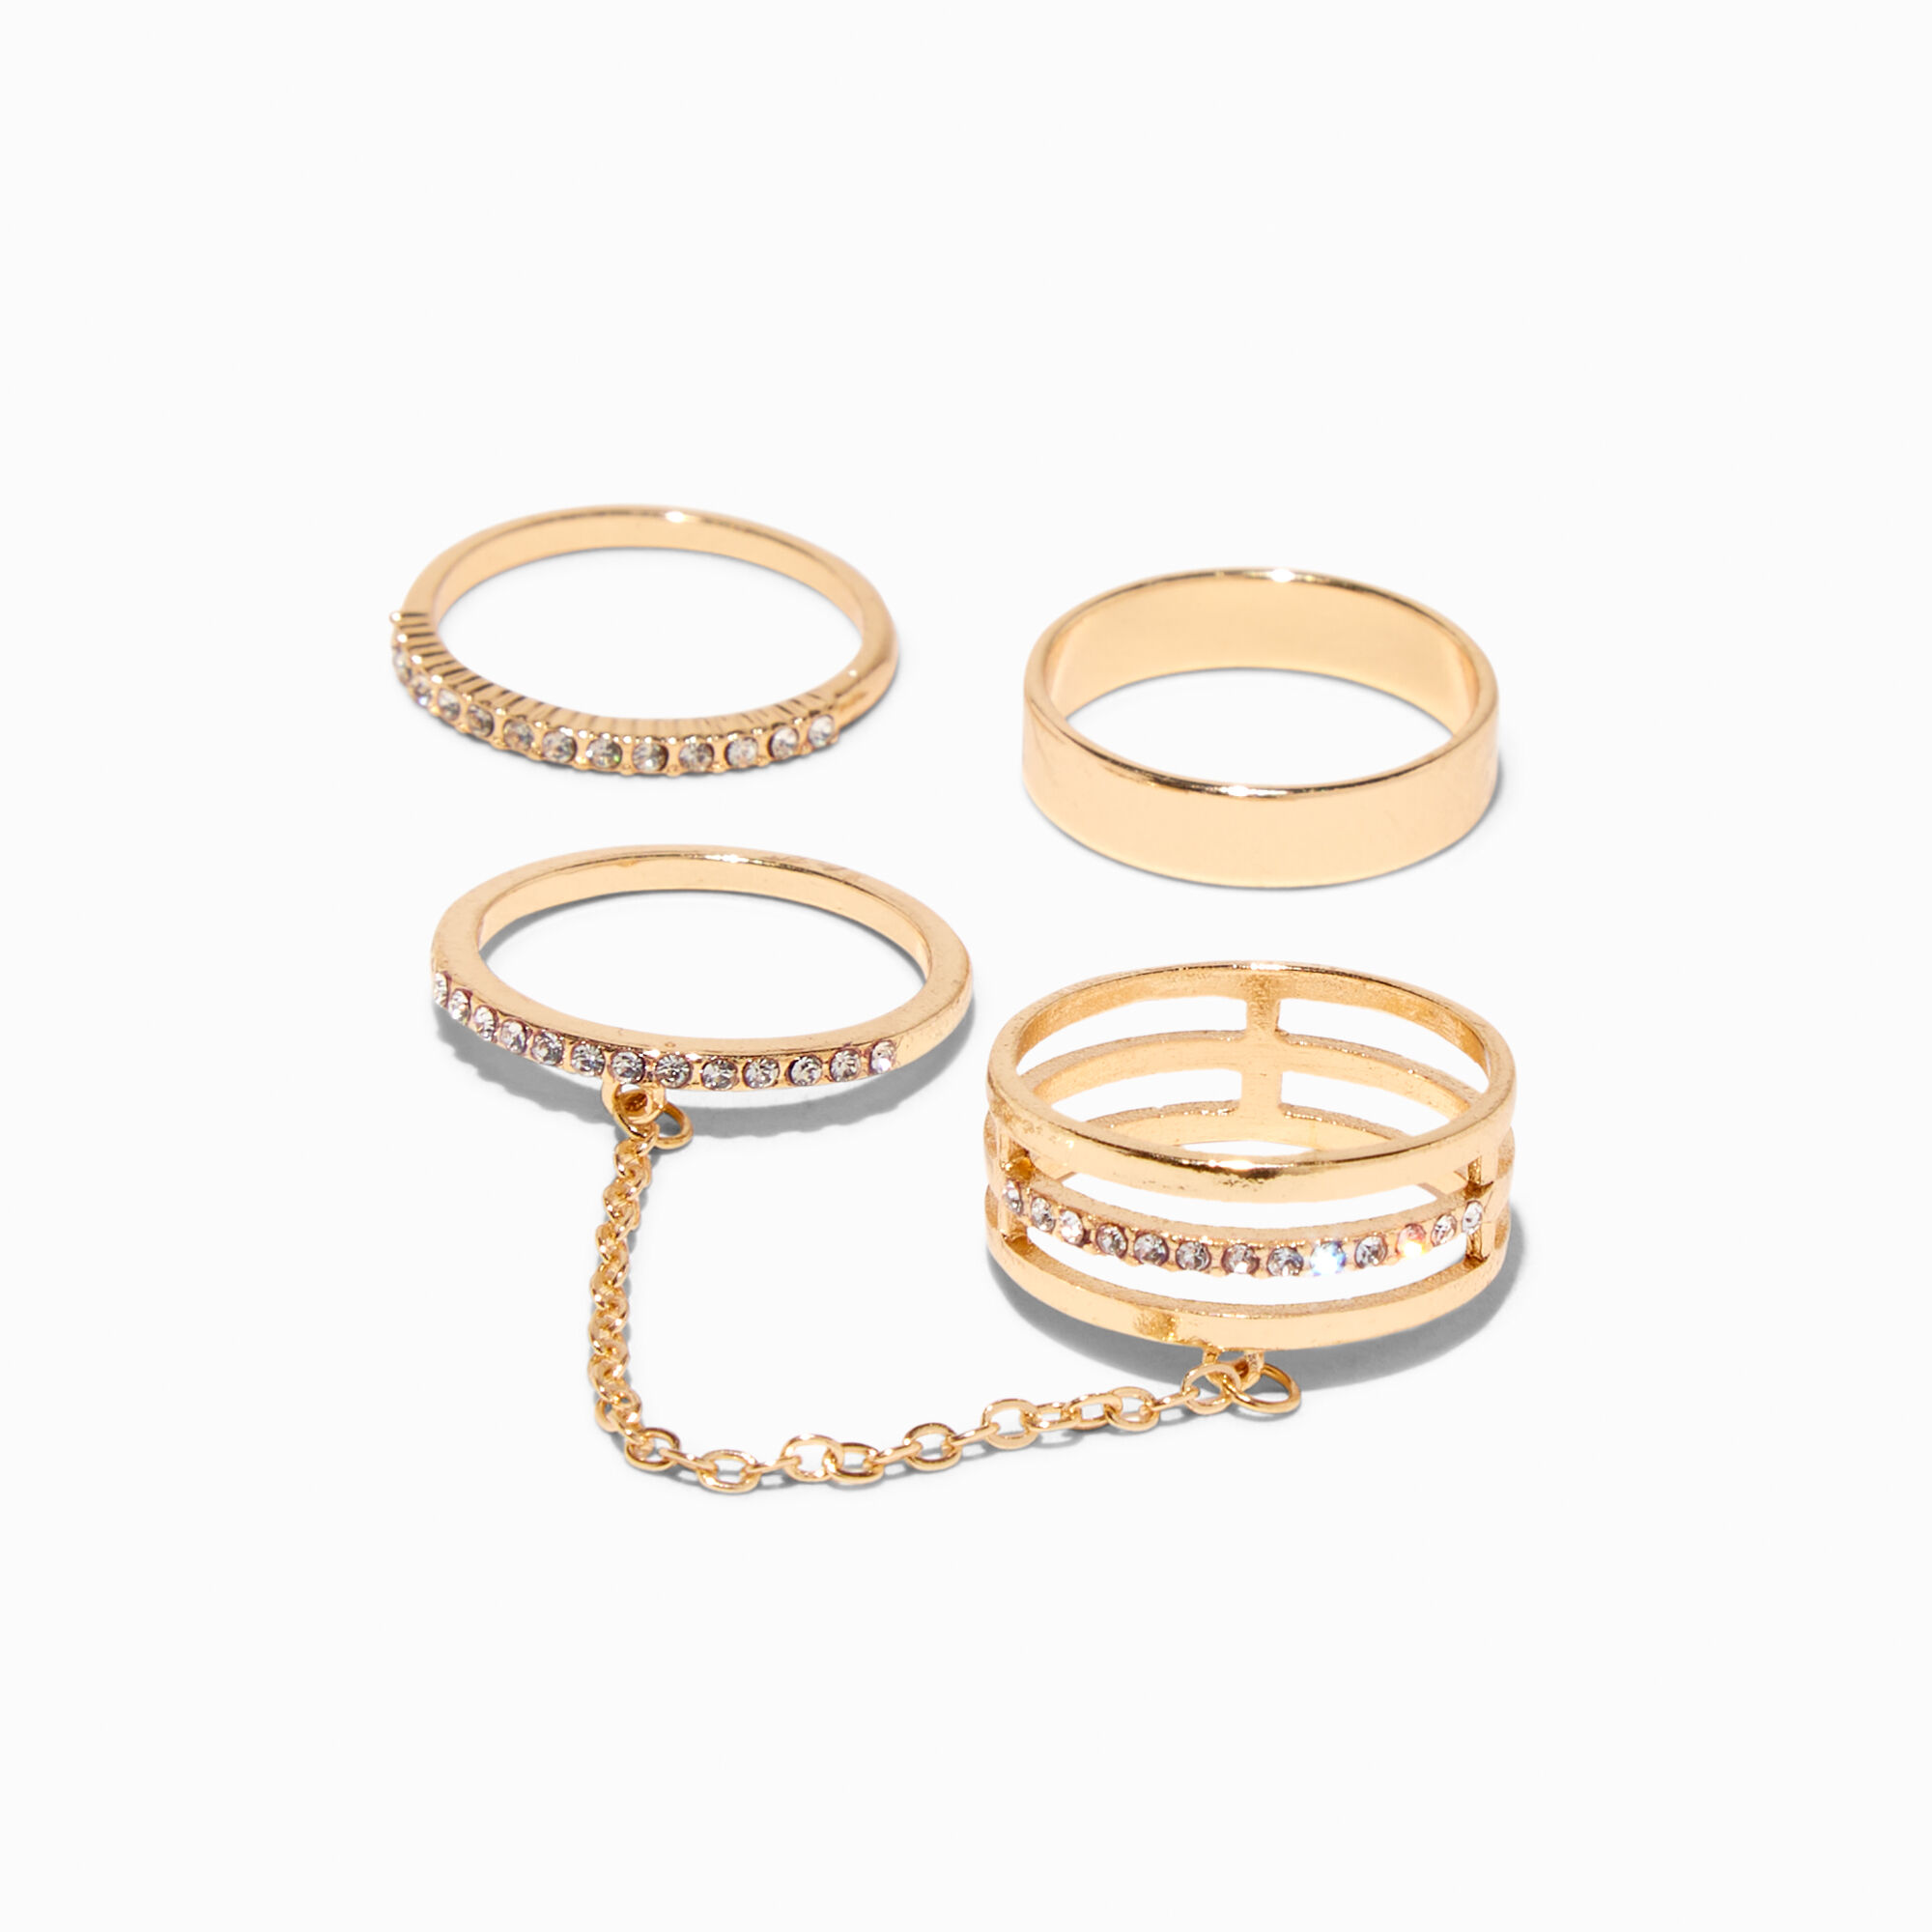 View Claires Crystal Tube Rings 3 Pack Gold information